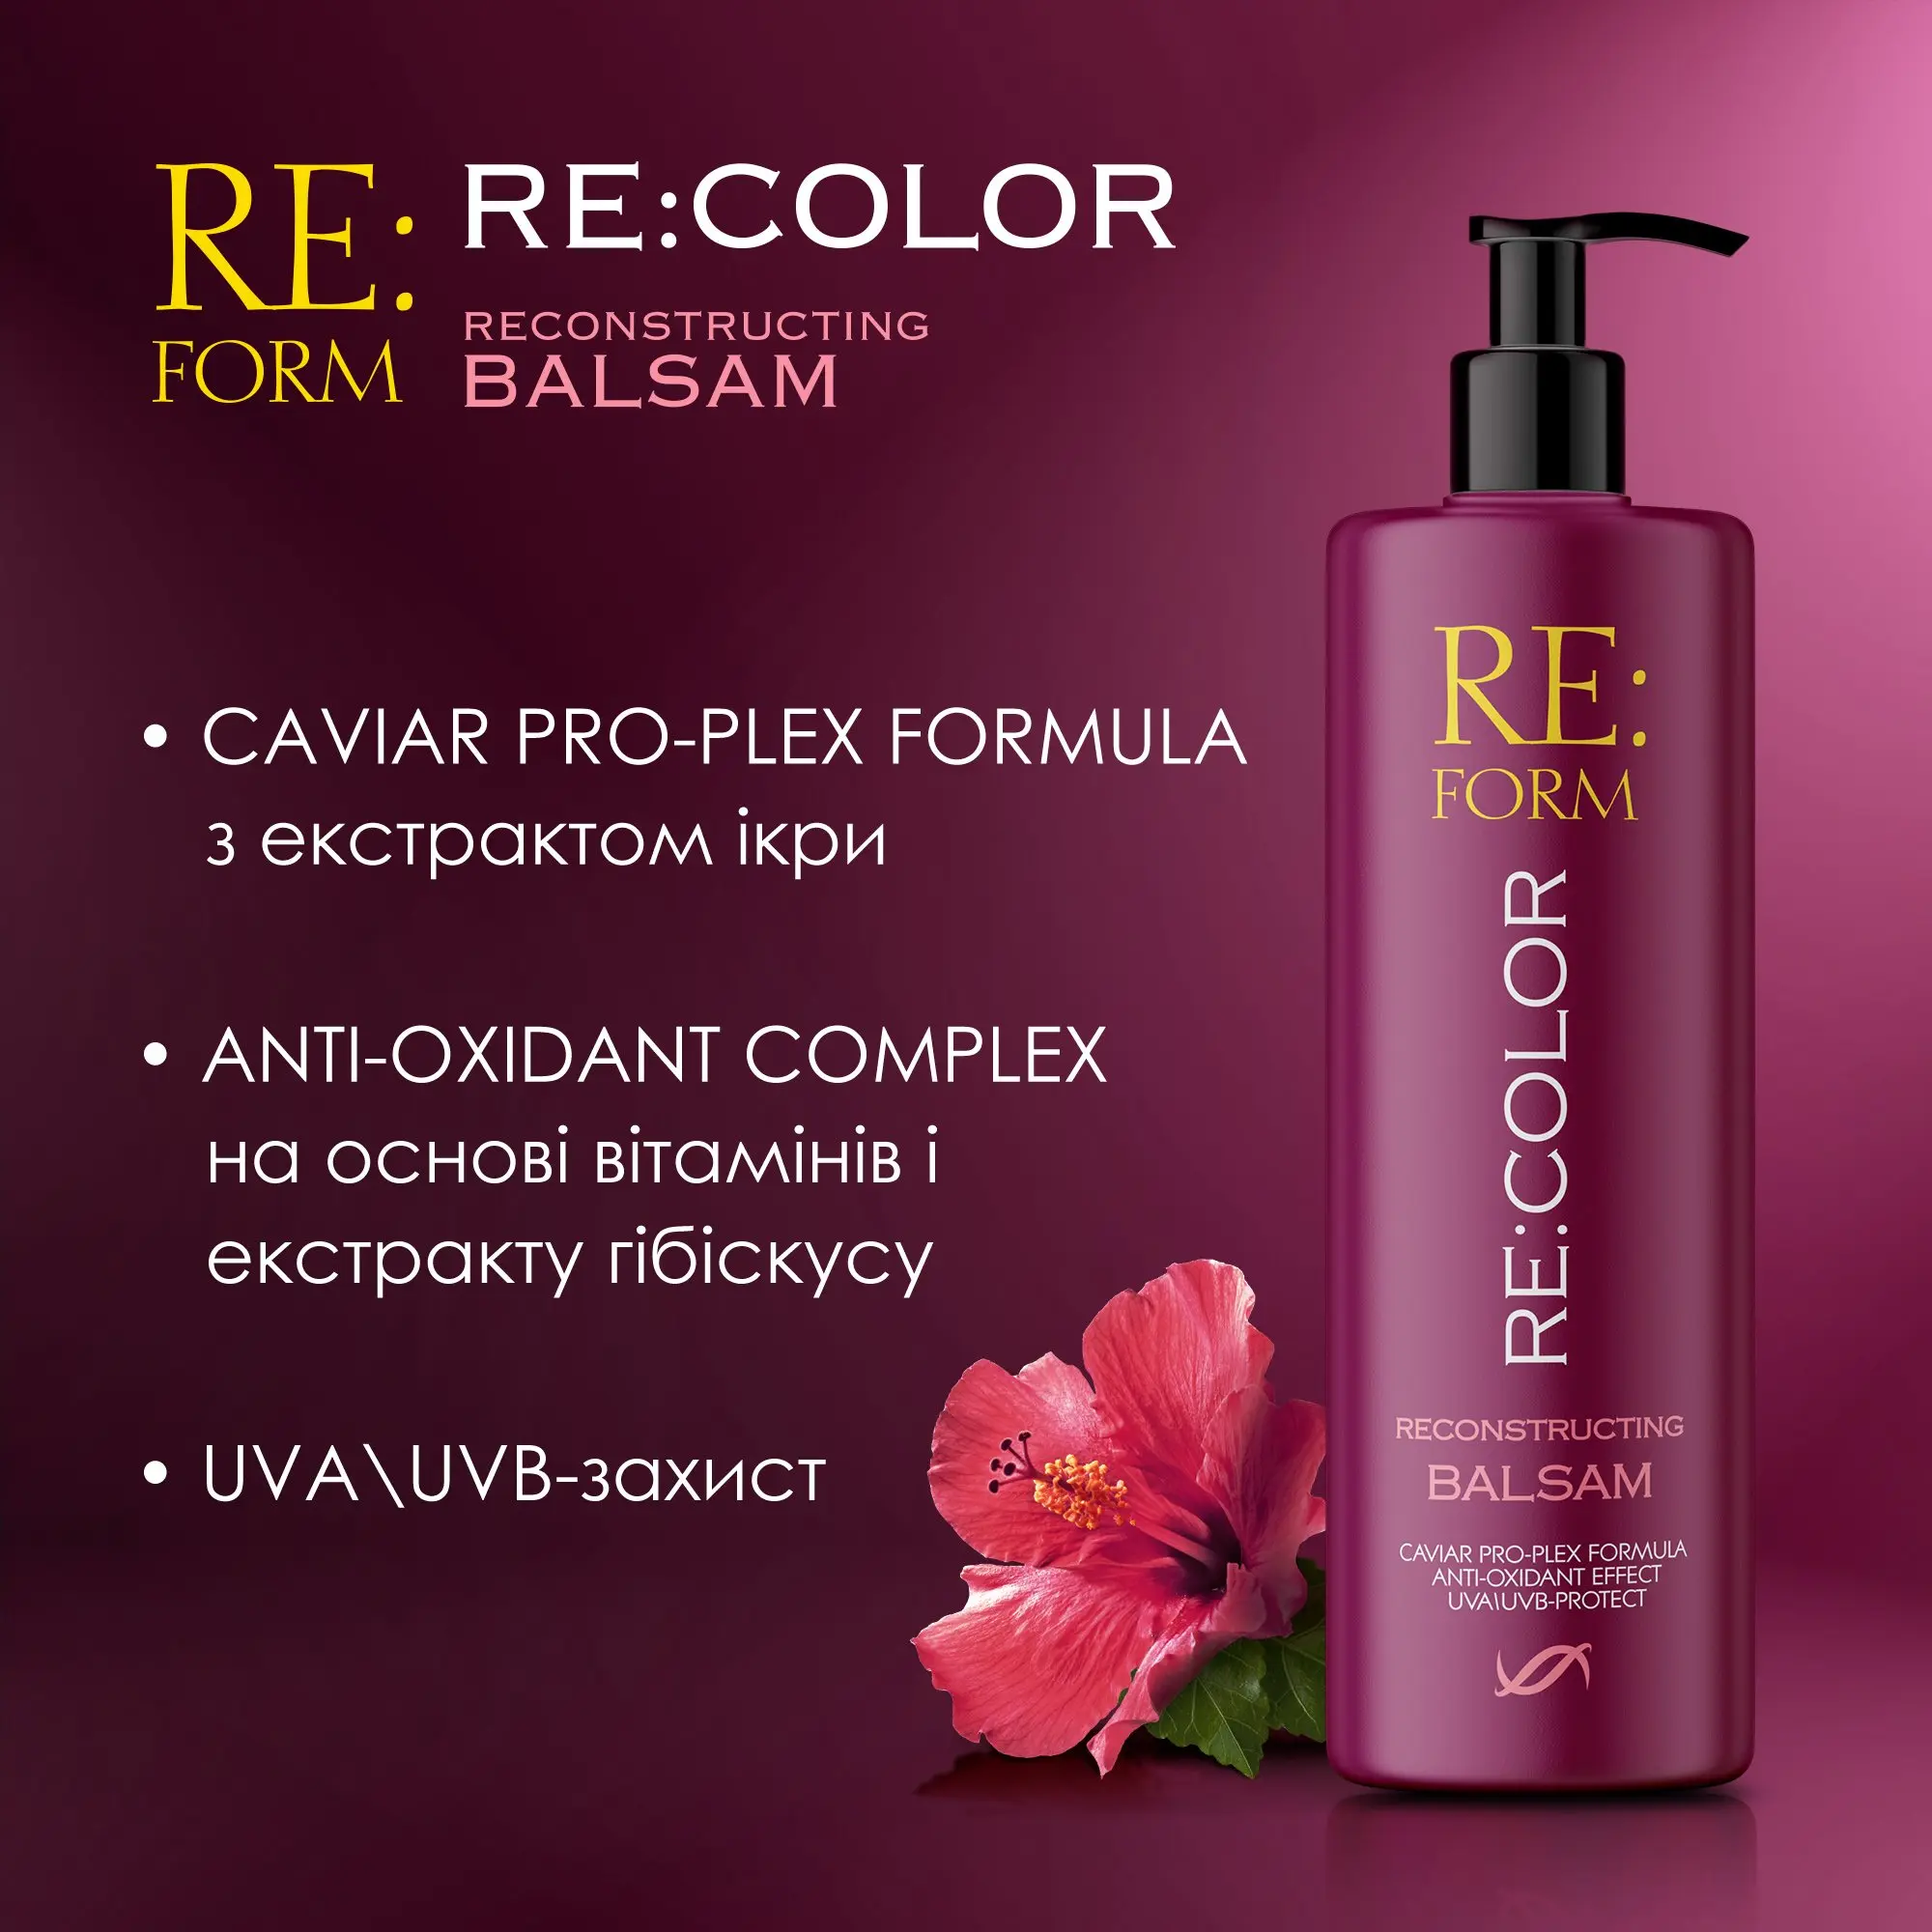 Reconstructing balm, 'RE:COLOR' RE:FORM, 400 ml Фото №9